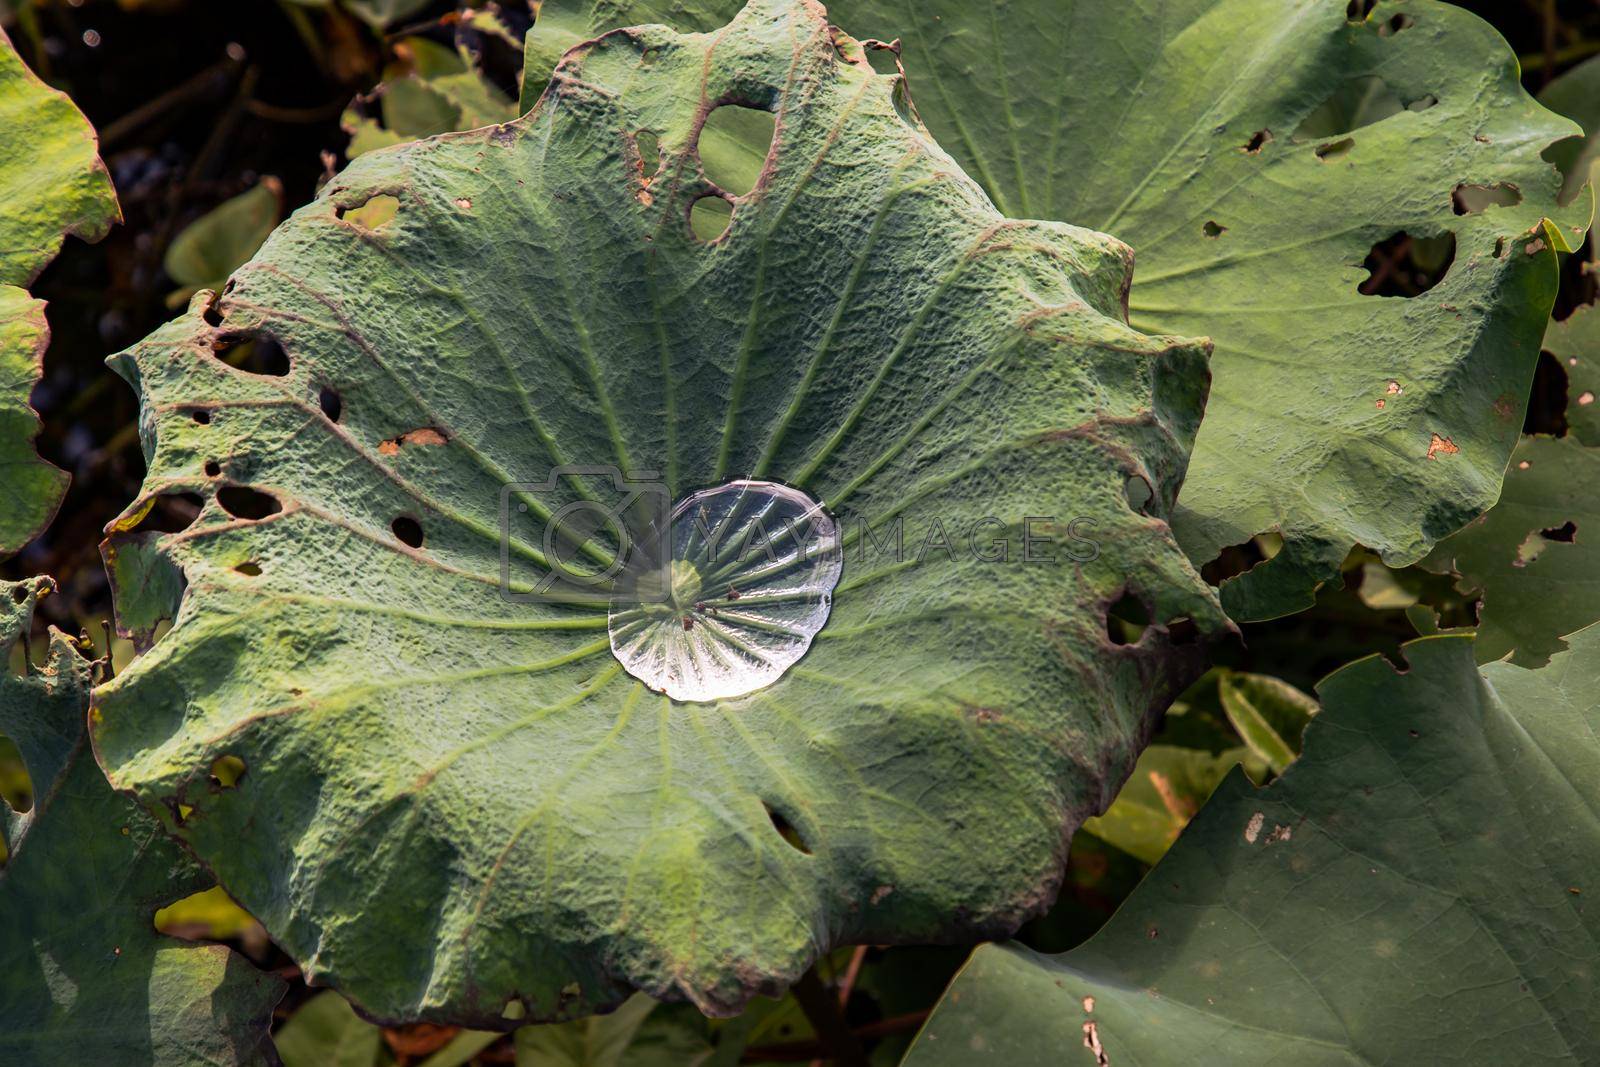 Close-up of Water droplets on surface of green water lily leaves floating in pond. Green lotus leaf with water droplets with selective focus on the subject.